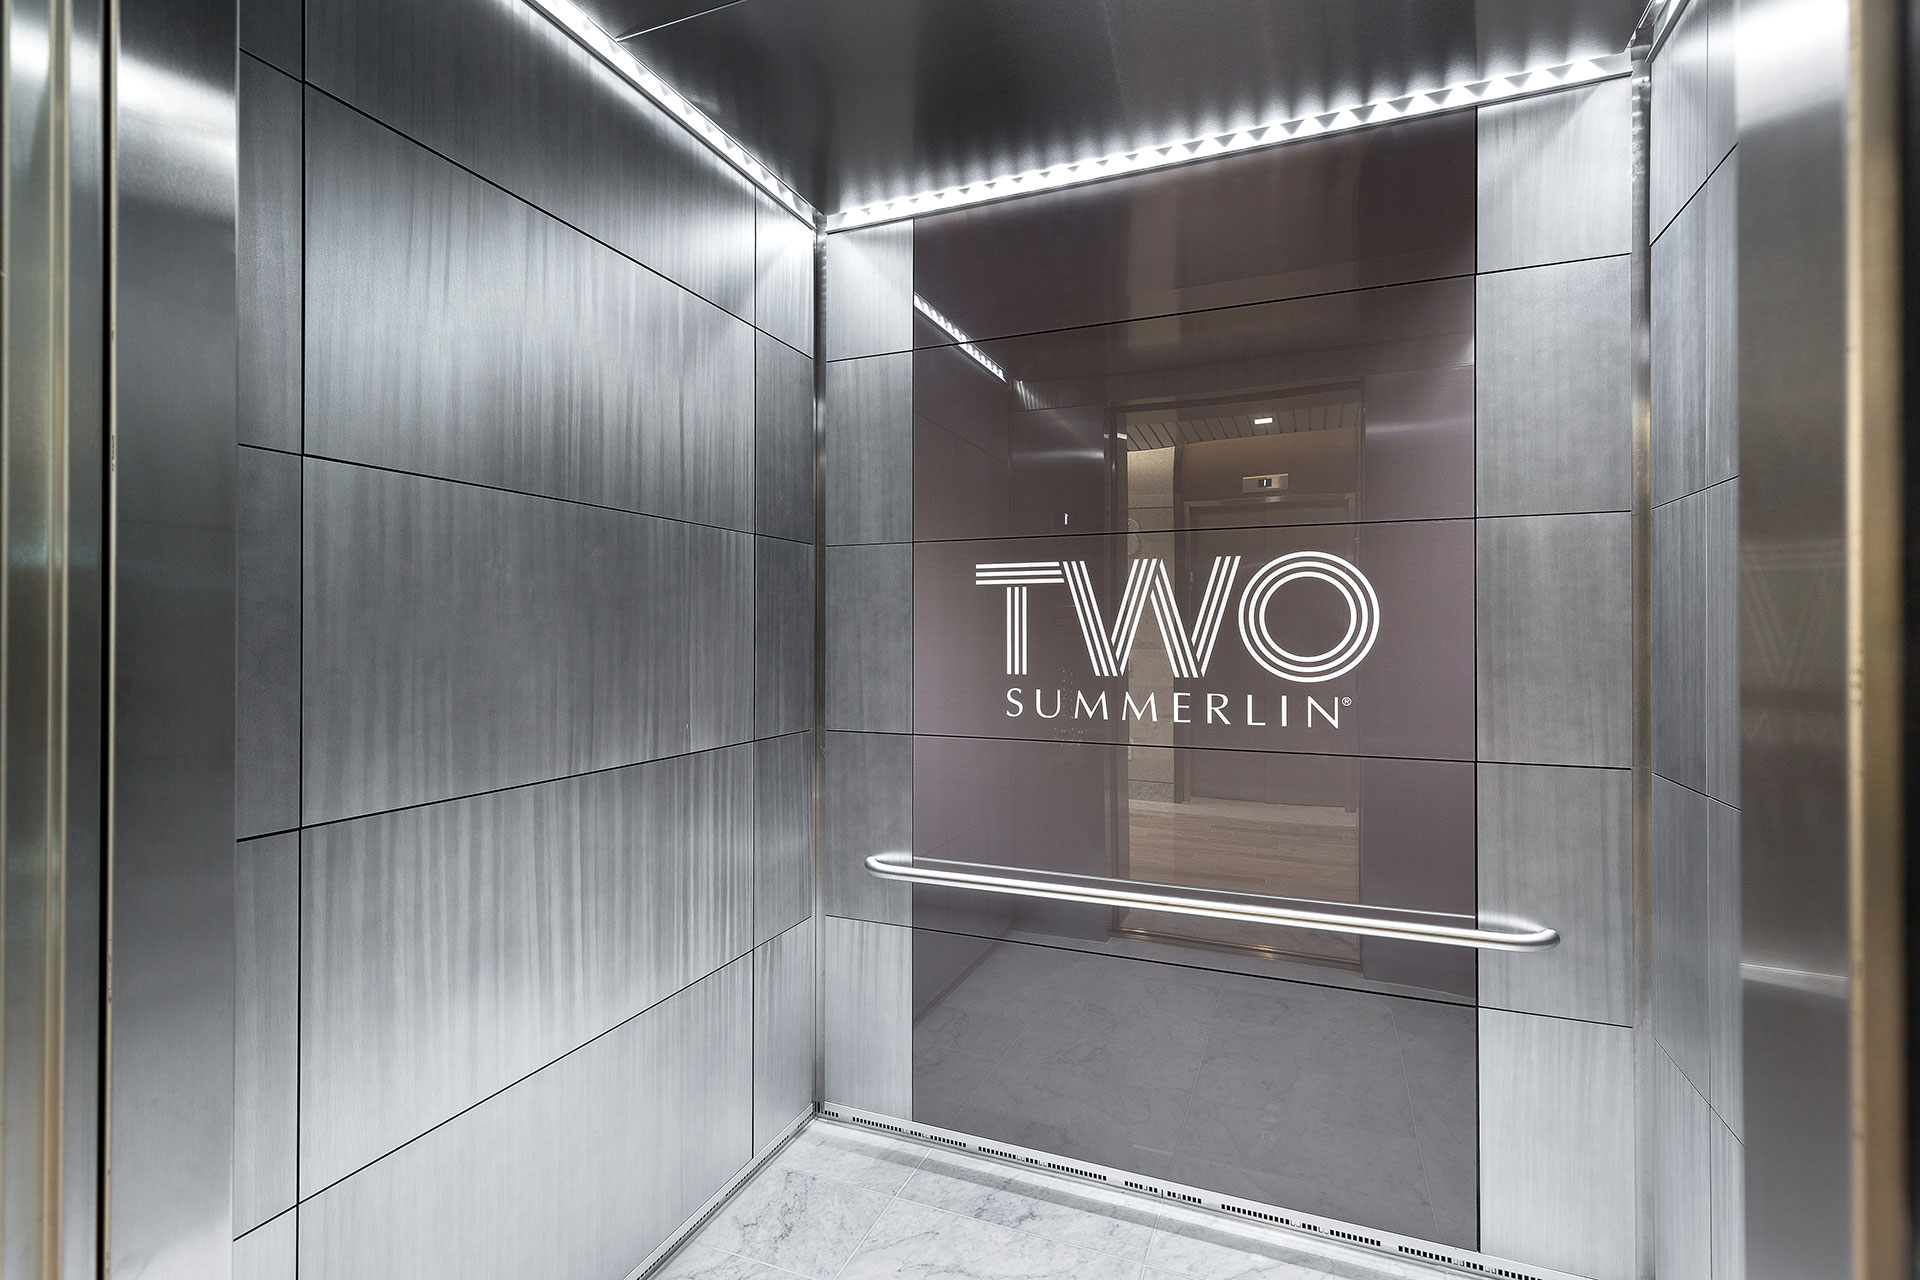 And elevator interior with shiny silver walls and a grey glass center panel with the words "Two Summerlin" written in white and white LED lighting atop.